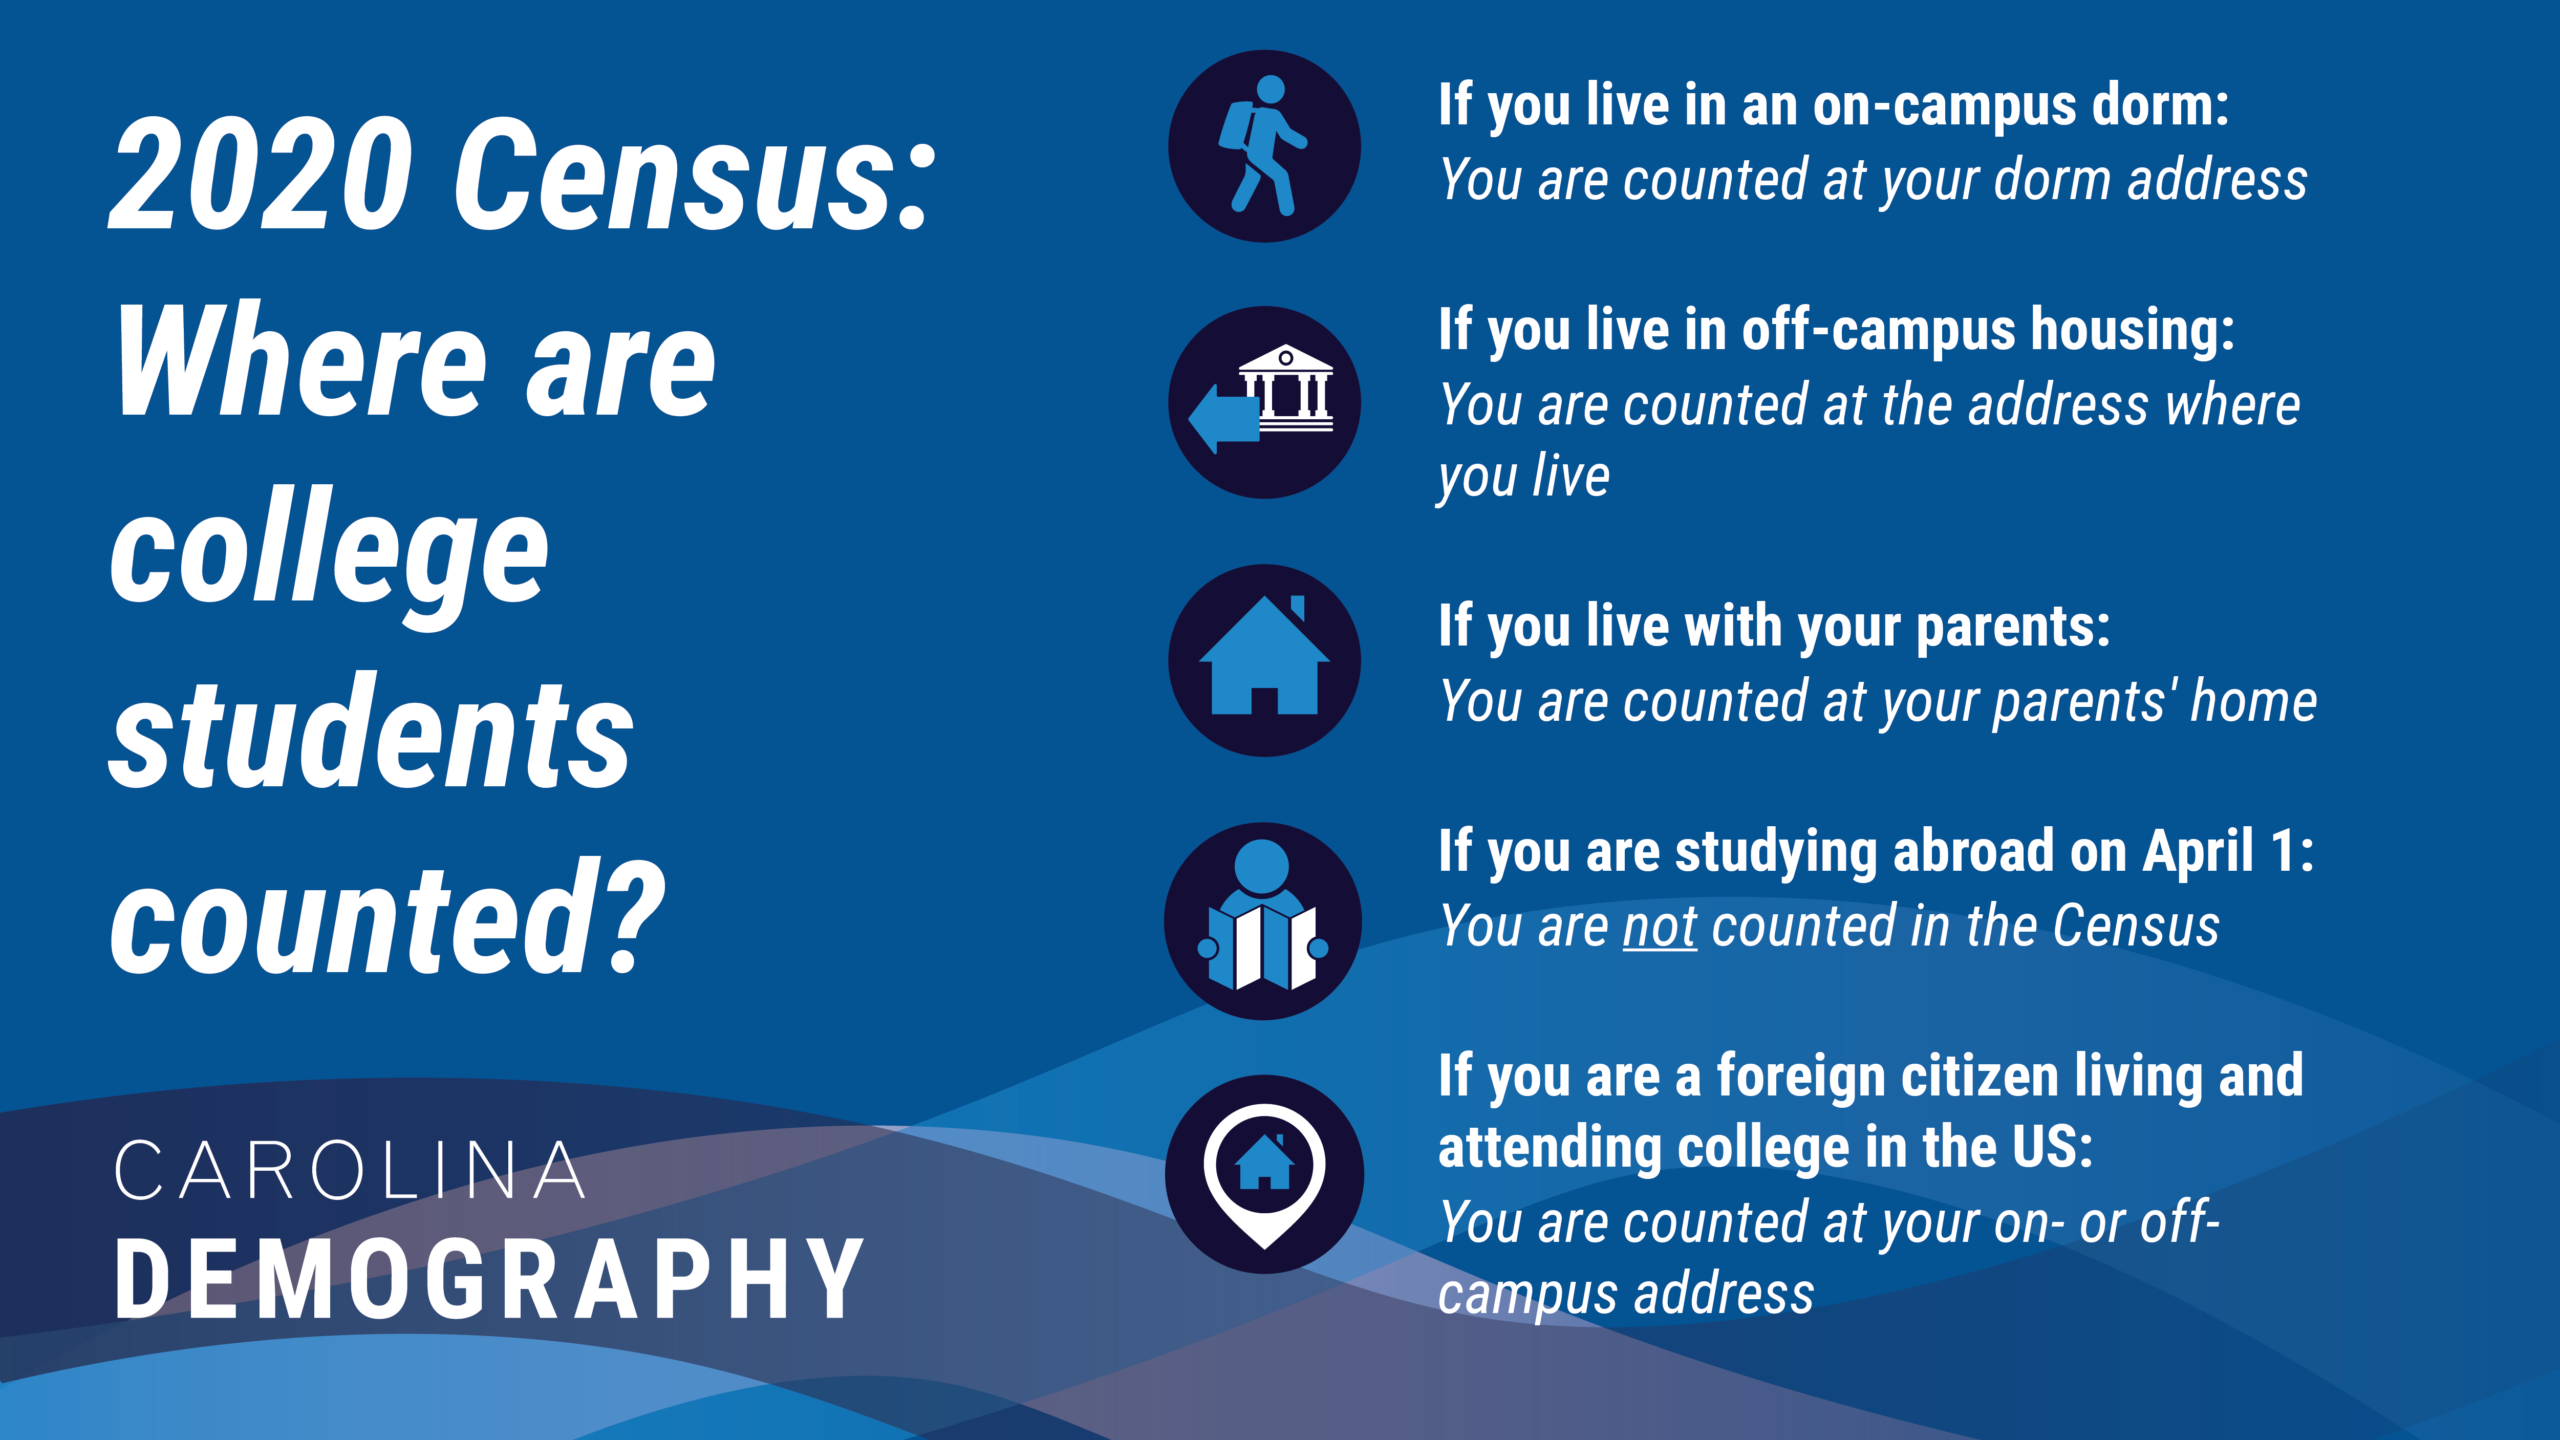 2020 Census: Where are college students counted? If you live in an on-campus dorm: You are counted at your dorm address If you live in off-campus housing: You are counted at the address where you live If you live with your parents: You are counted at your parents' home If you are studying abroad on April 1: You are not counted in the Census If you are a foreign citizen living and attending college in the US: You are counted at your on- or off- campus address